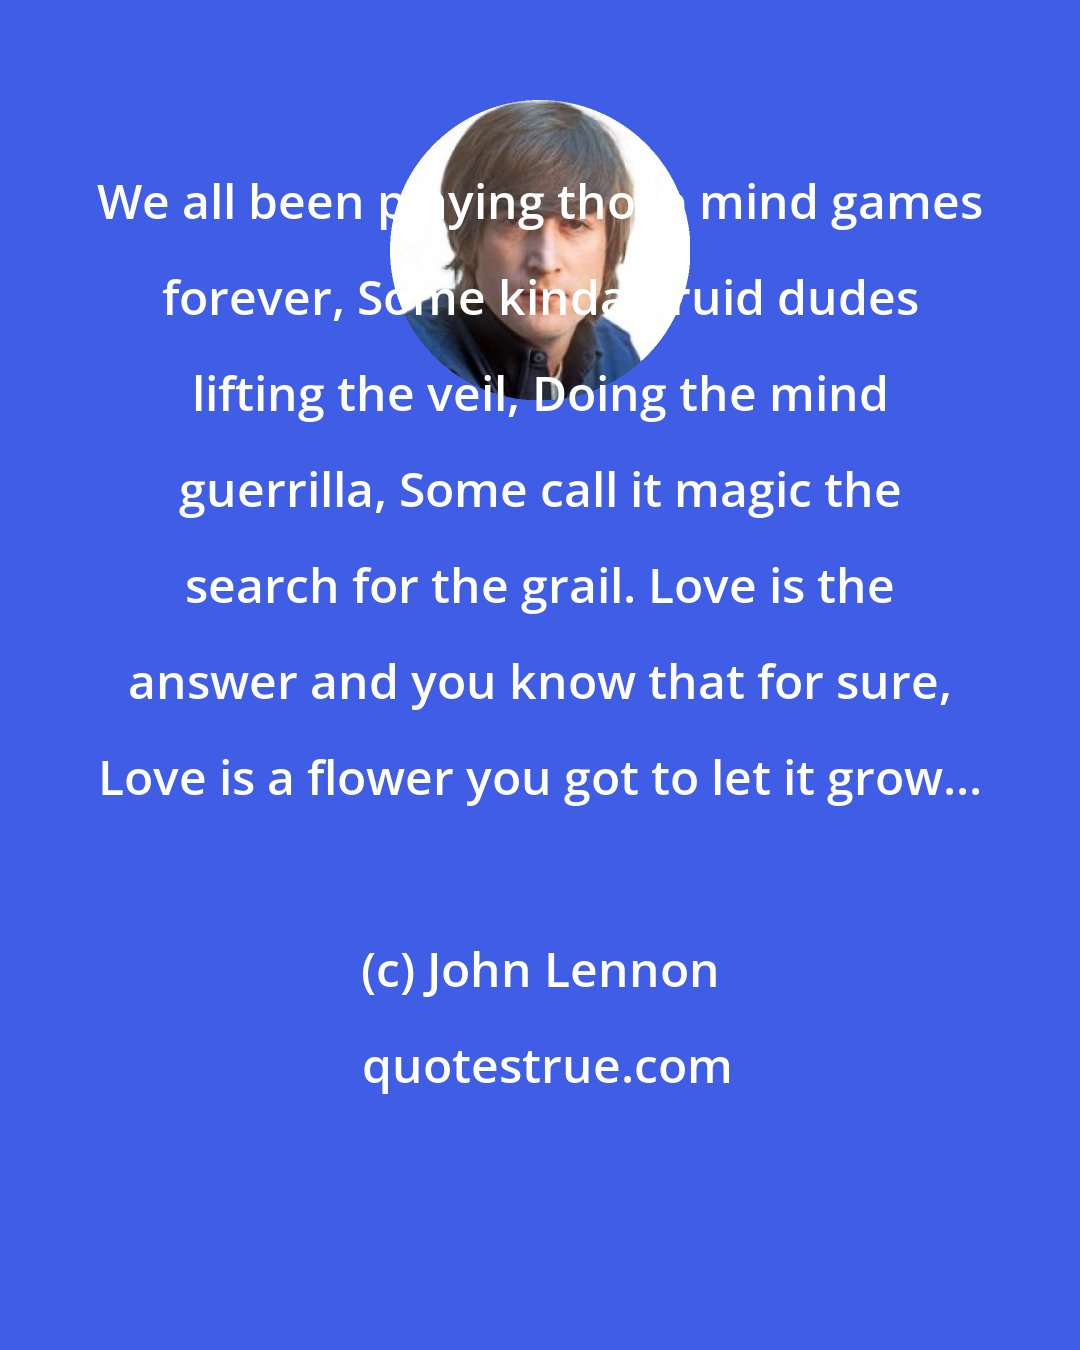 John Lennon: We all been playing those mind games forever, Some kinda druid dudes lifting the veil, Doing the mind guerrilla, Some call it magic the search for the grail. Love is the answer and you know that for sure, Love is a flower you got to let it grow...